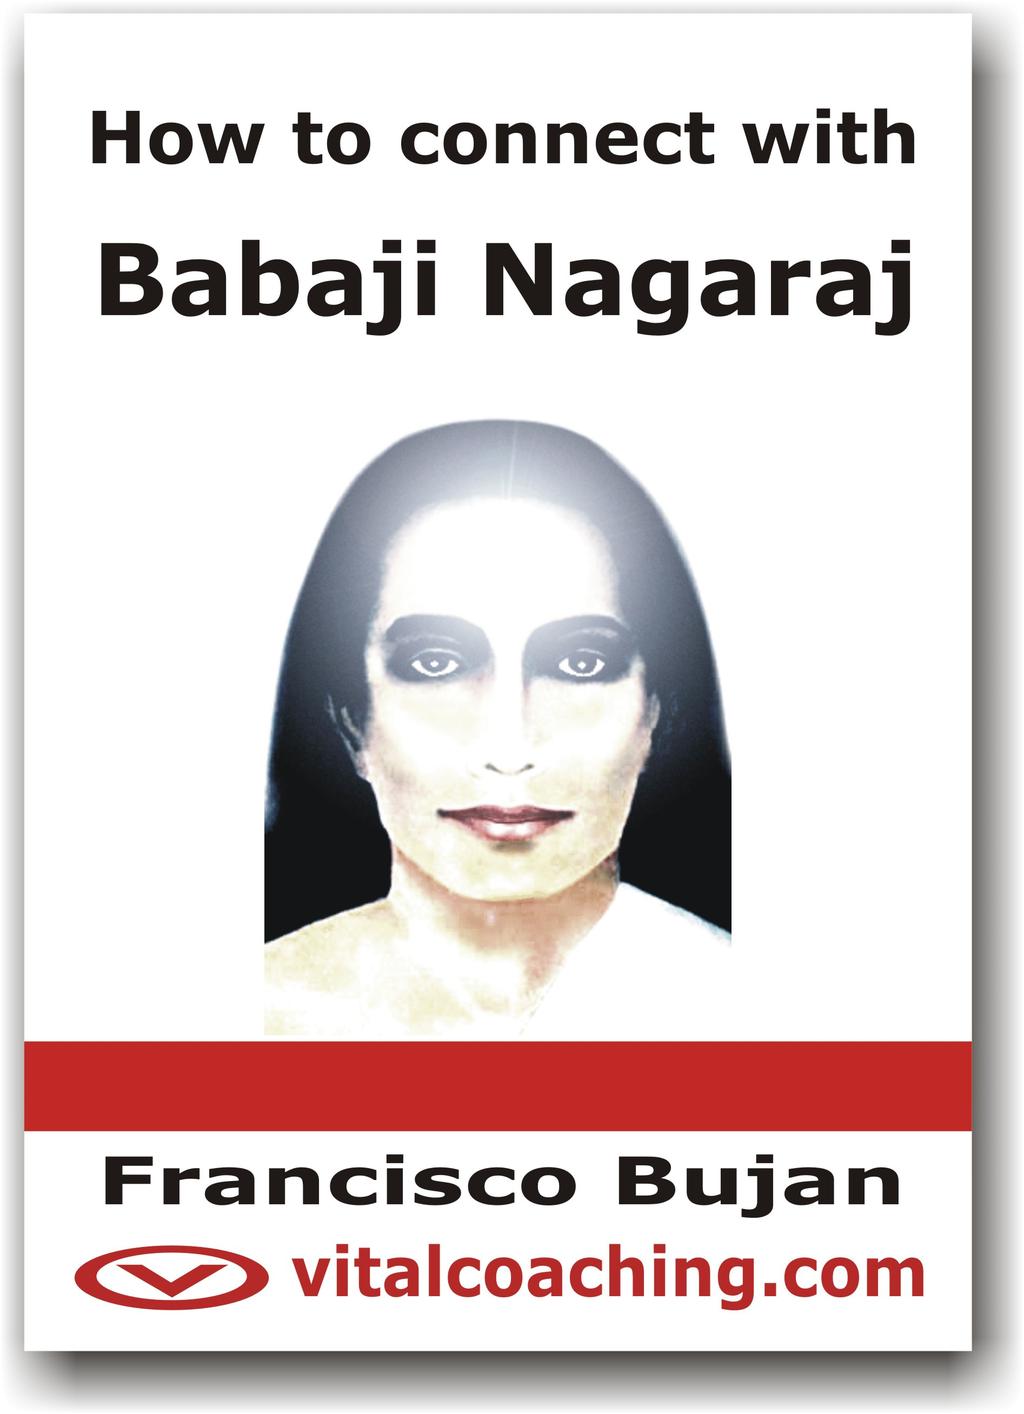 Get the complete Babaji Nagaraj book This book is only the first 30 pages of the complete How to